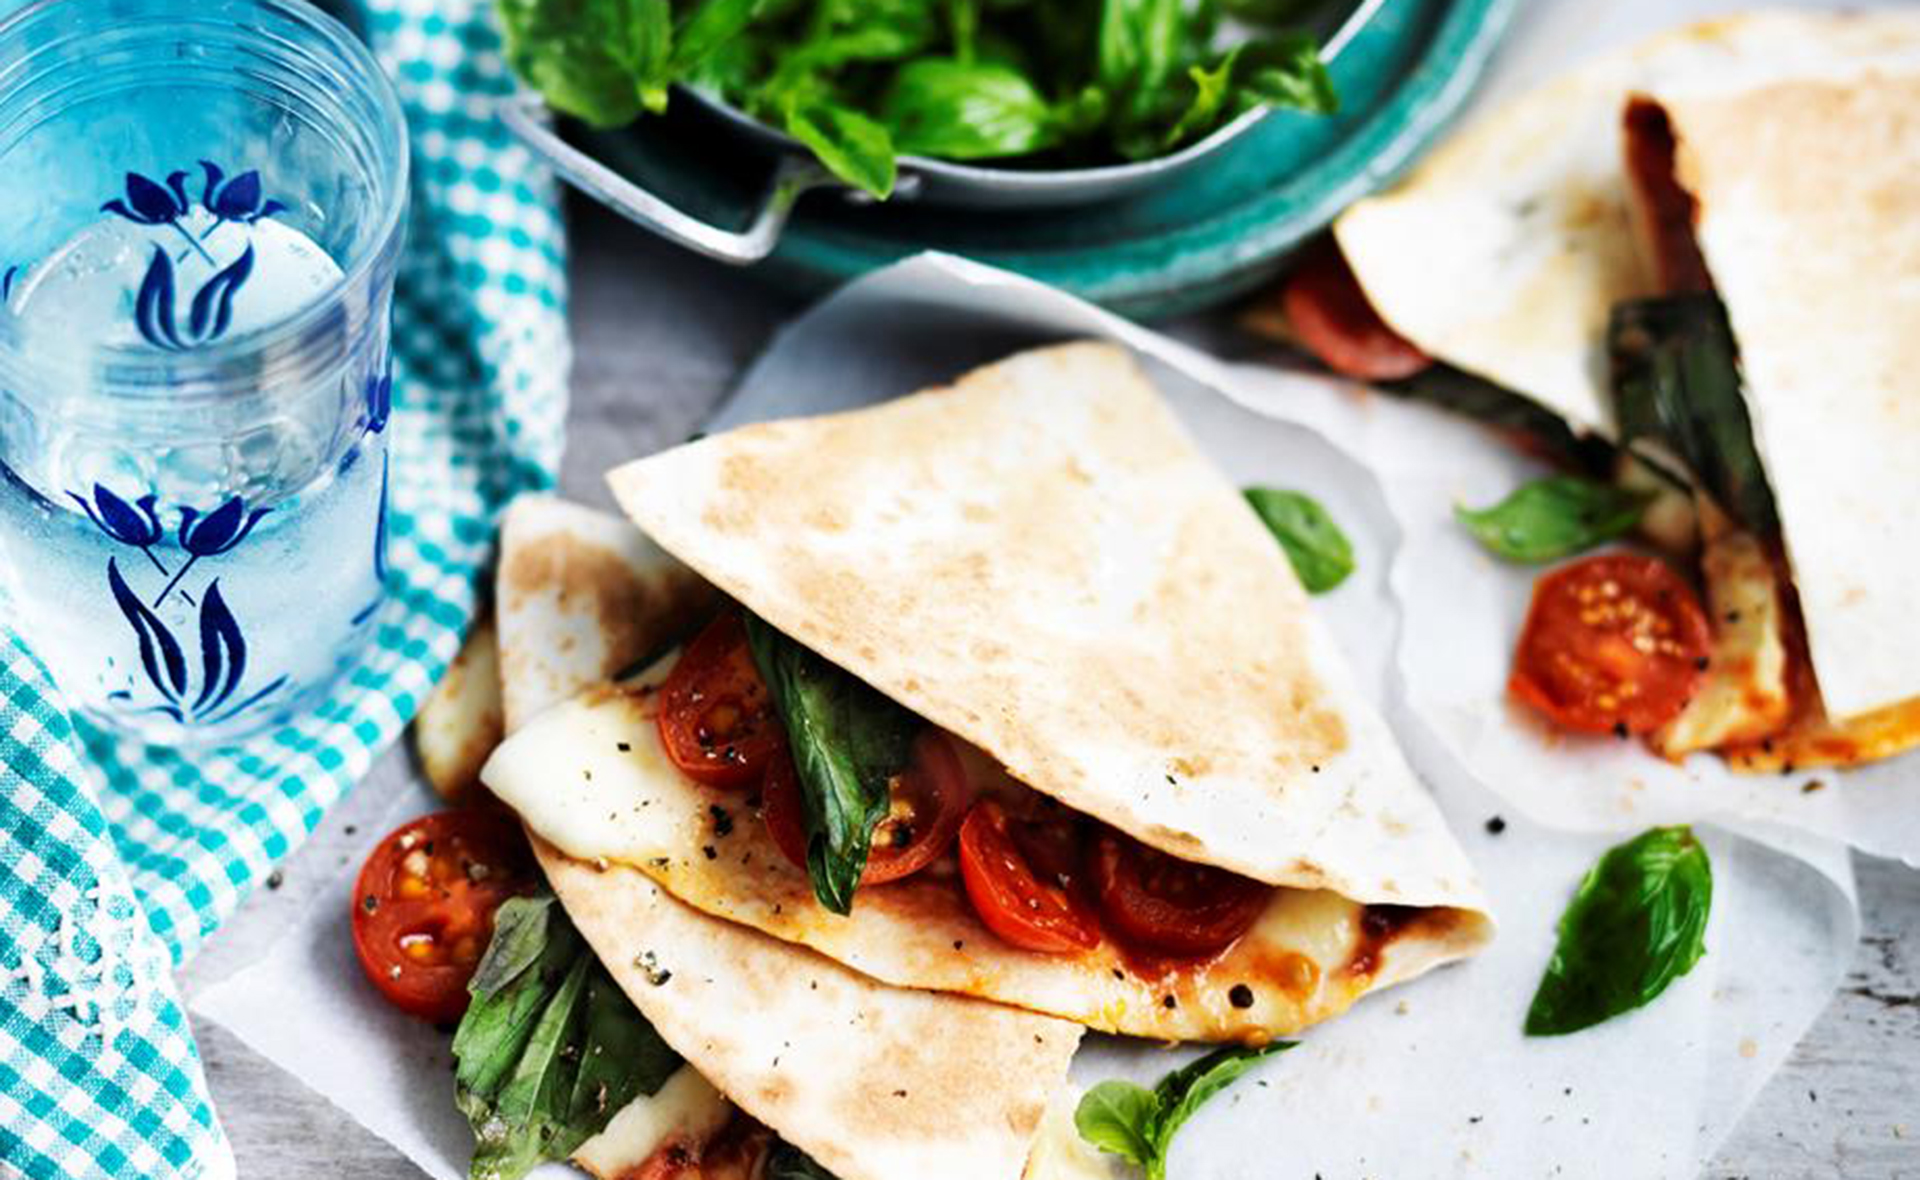 Tired of sandwiches? Try these 12 easy quesadilla recipes for lunch instead